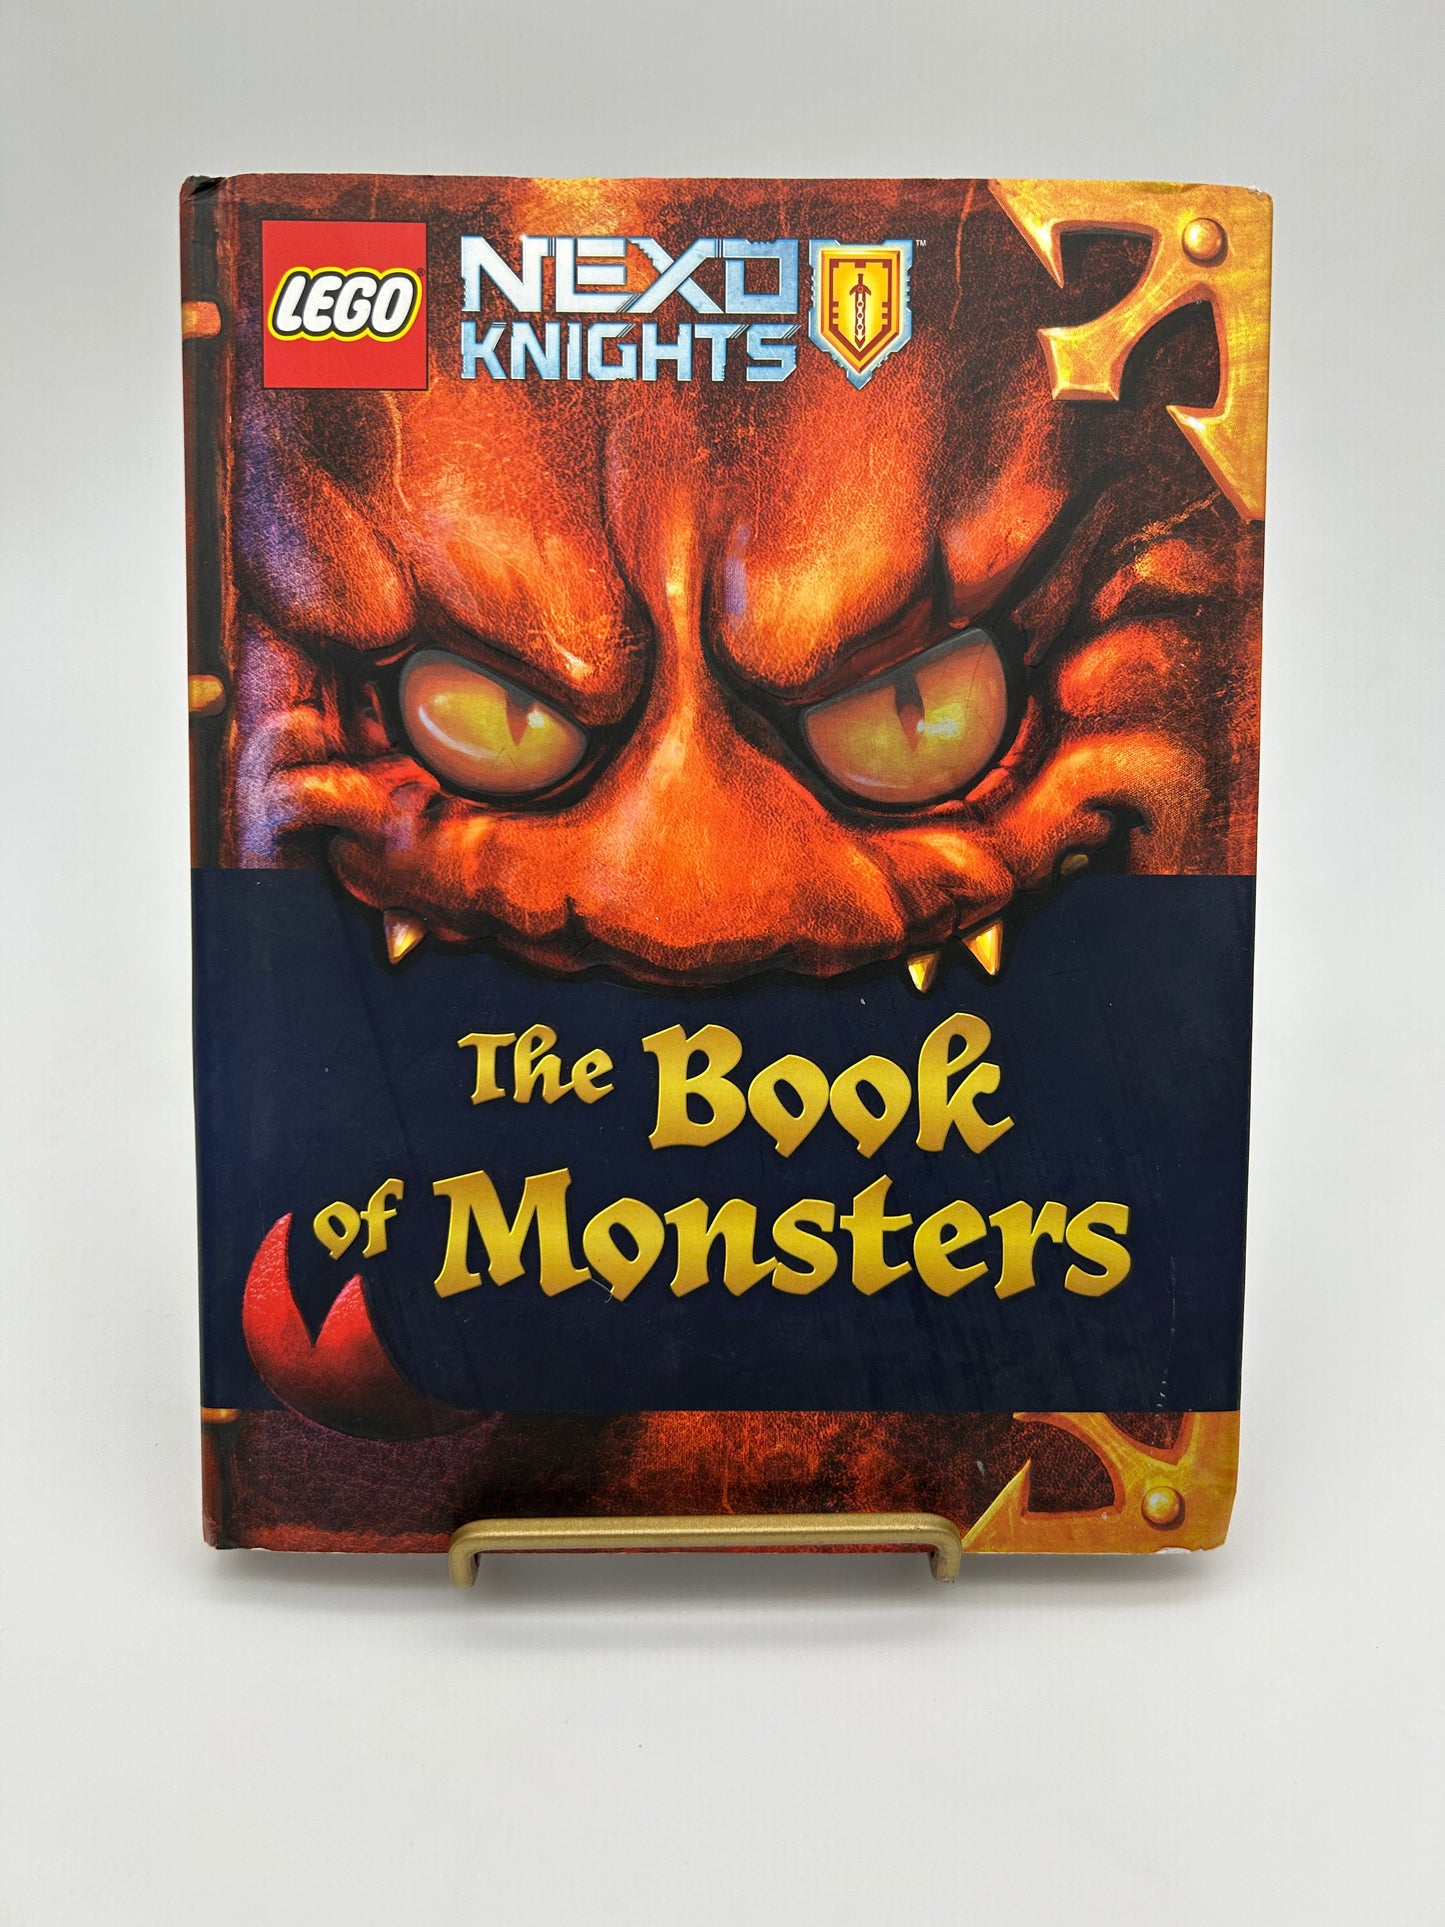 LEGO Nexo Knights, The Book of Monsters